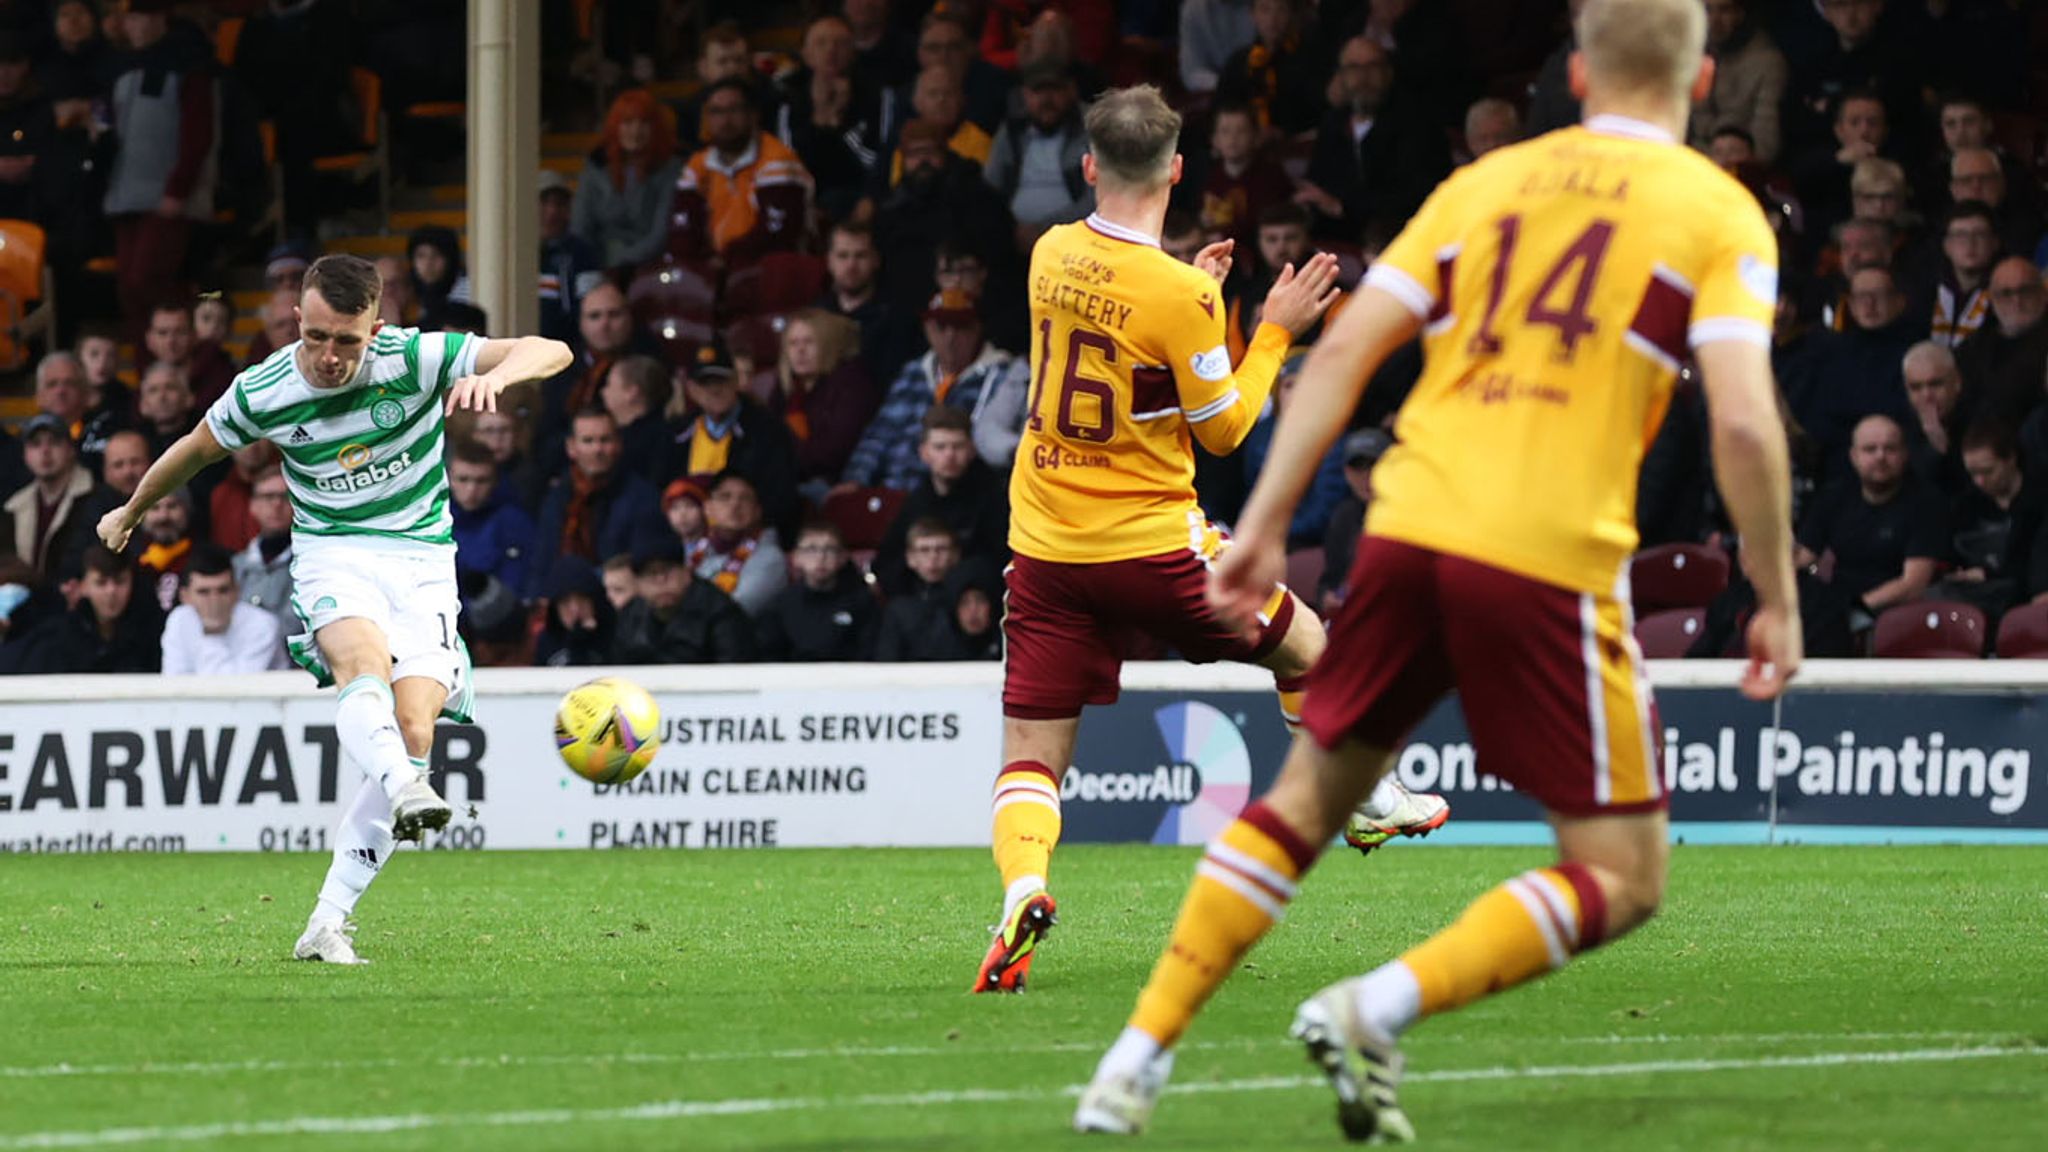 Motherwell 0-2 Celtic Jota and David Turnbull on target to give Hoops second straight win on the road Football News Sky Sports